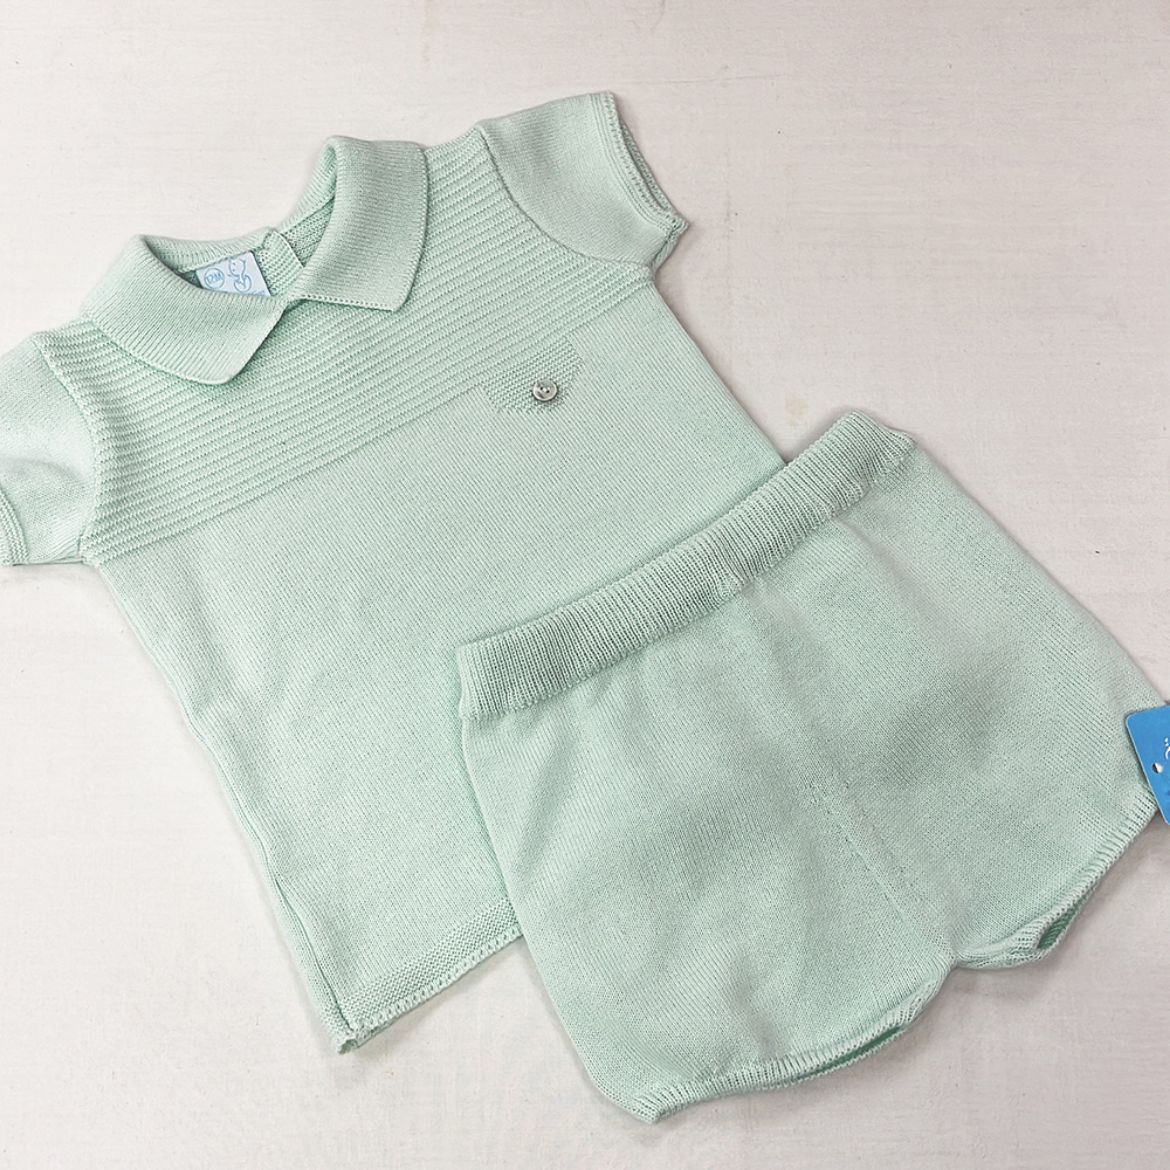 Picture of Granlei Boys Mint Green Knitted Short Set